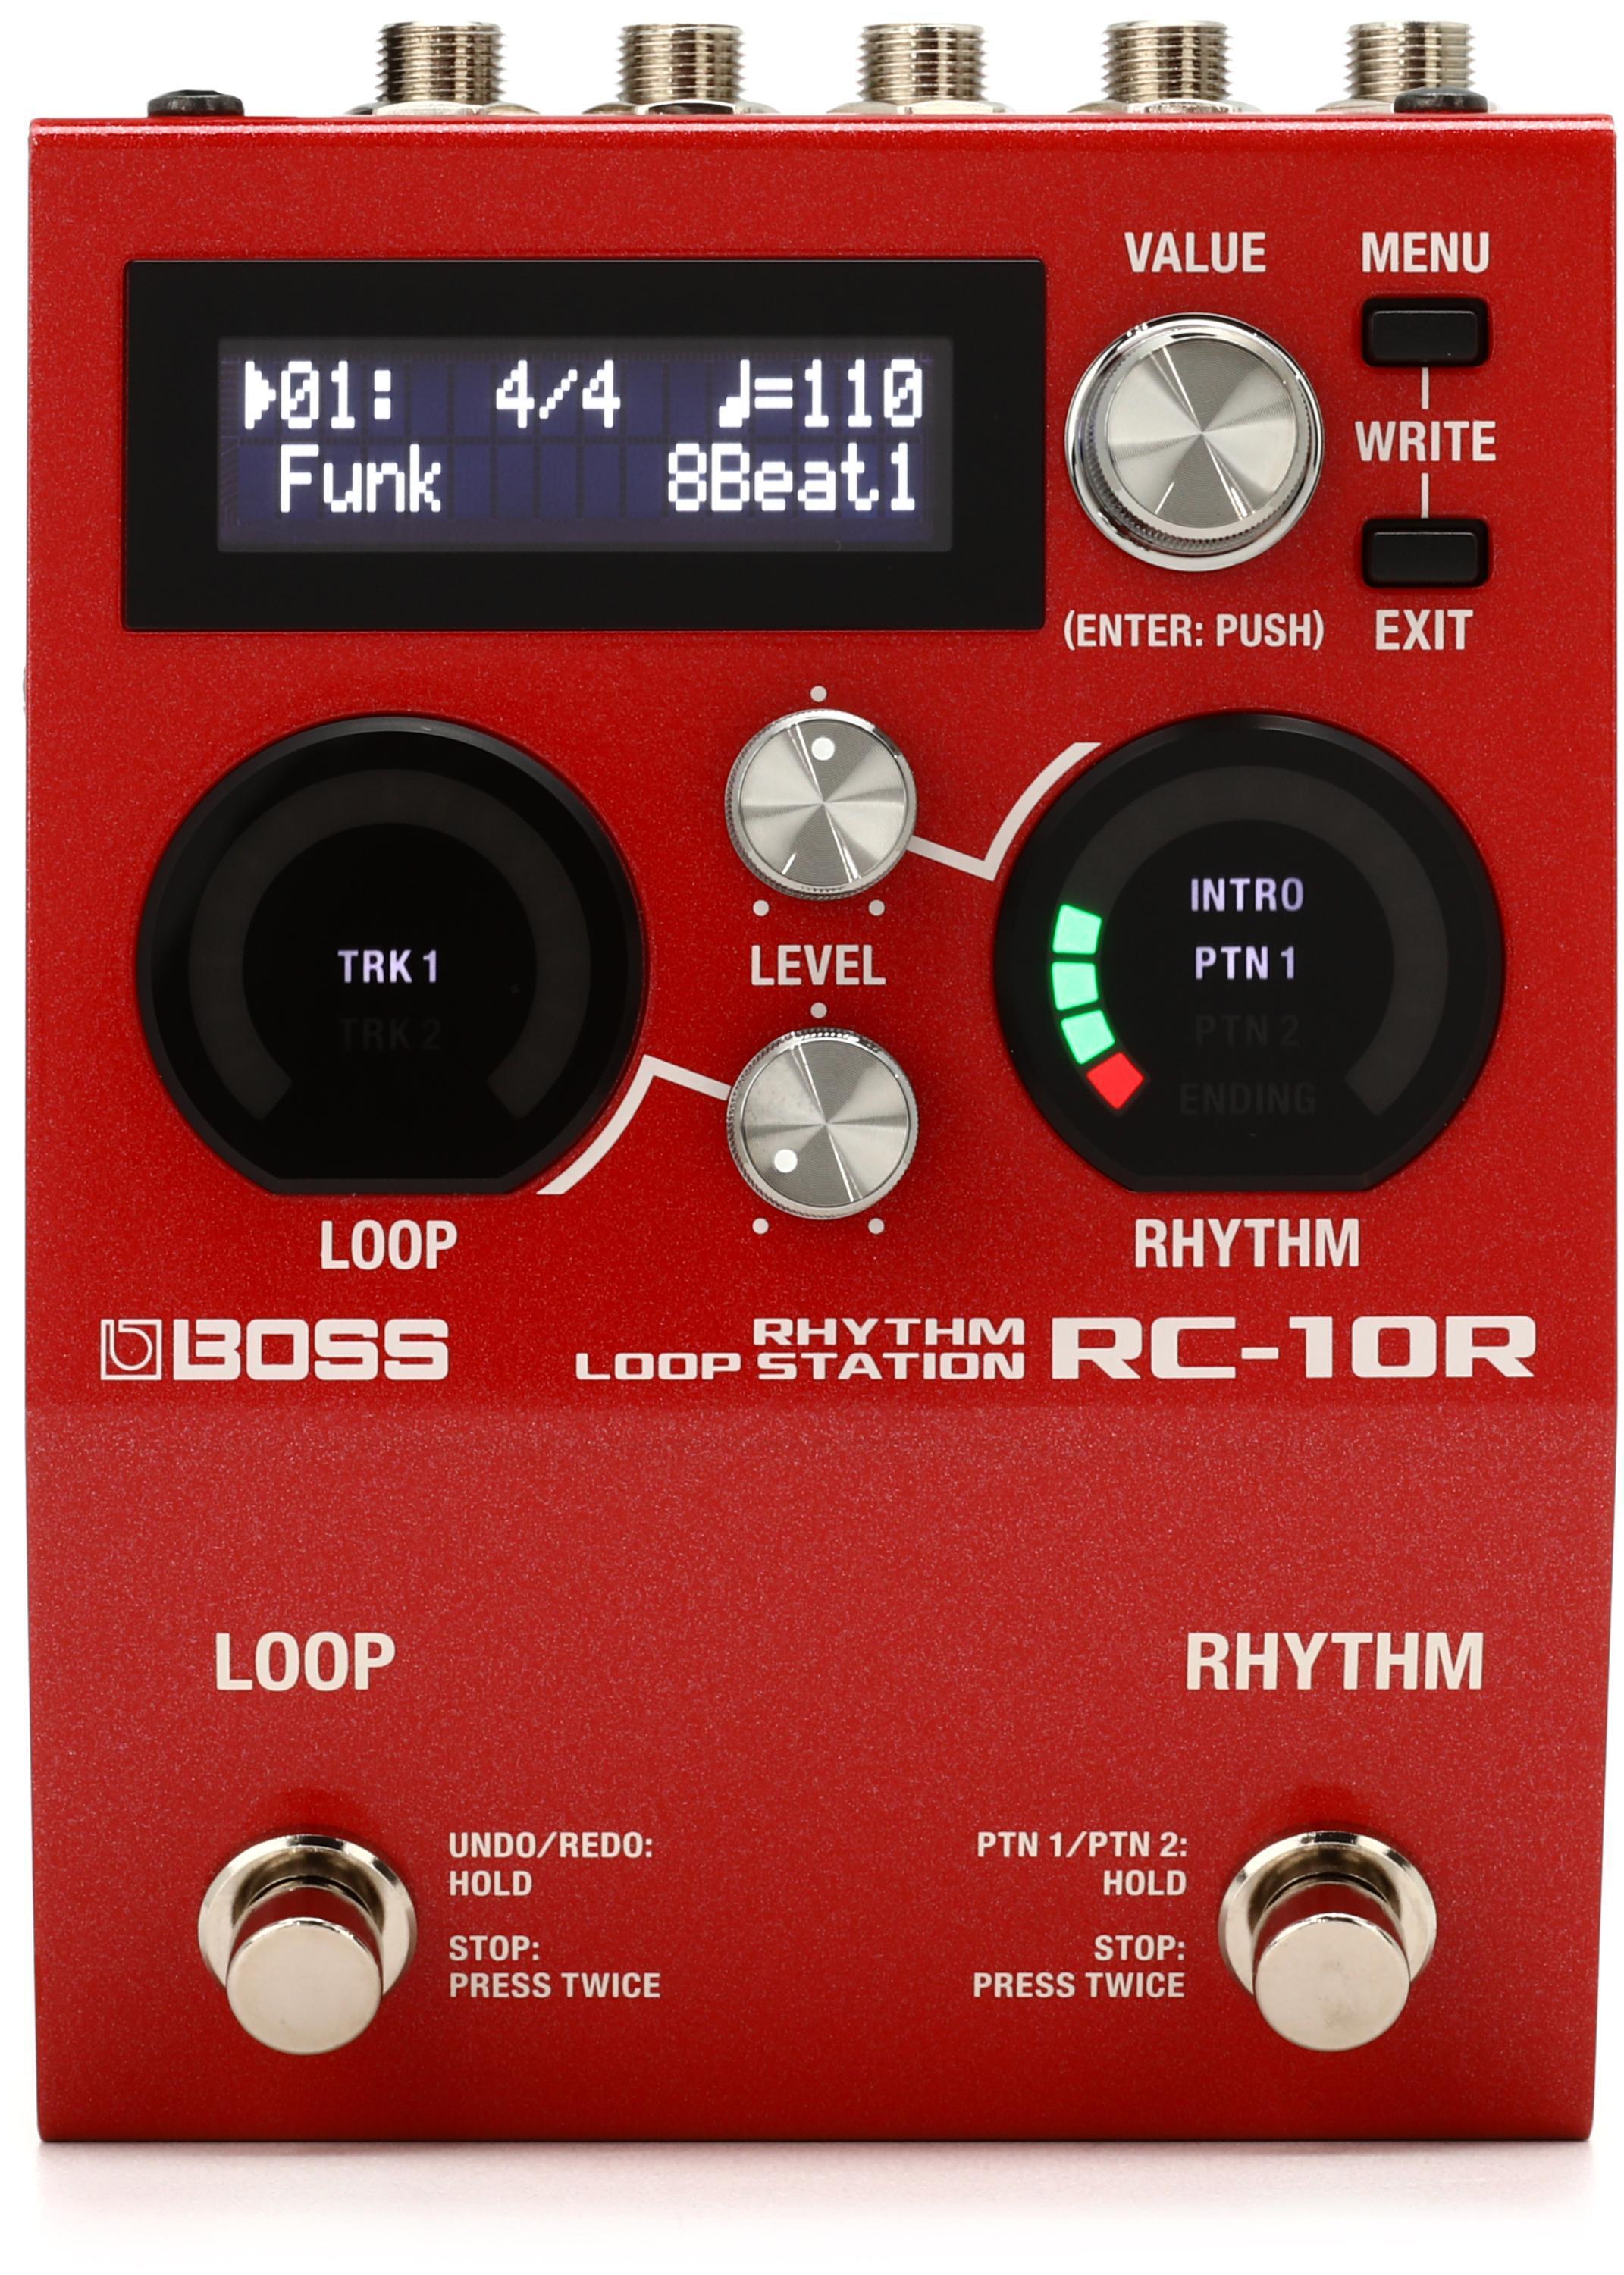 Boss RC-30 Phrase Looper Pedal | Sweetwater